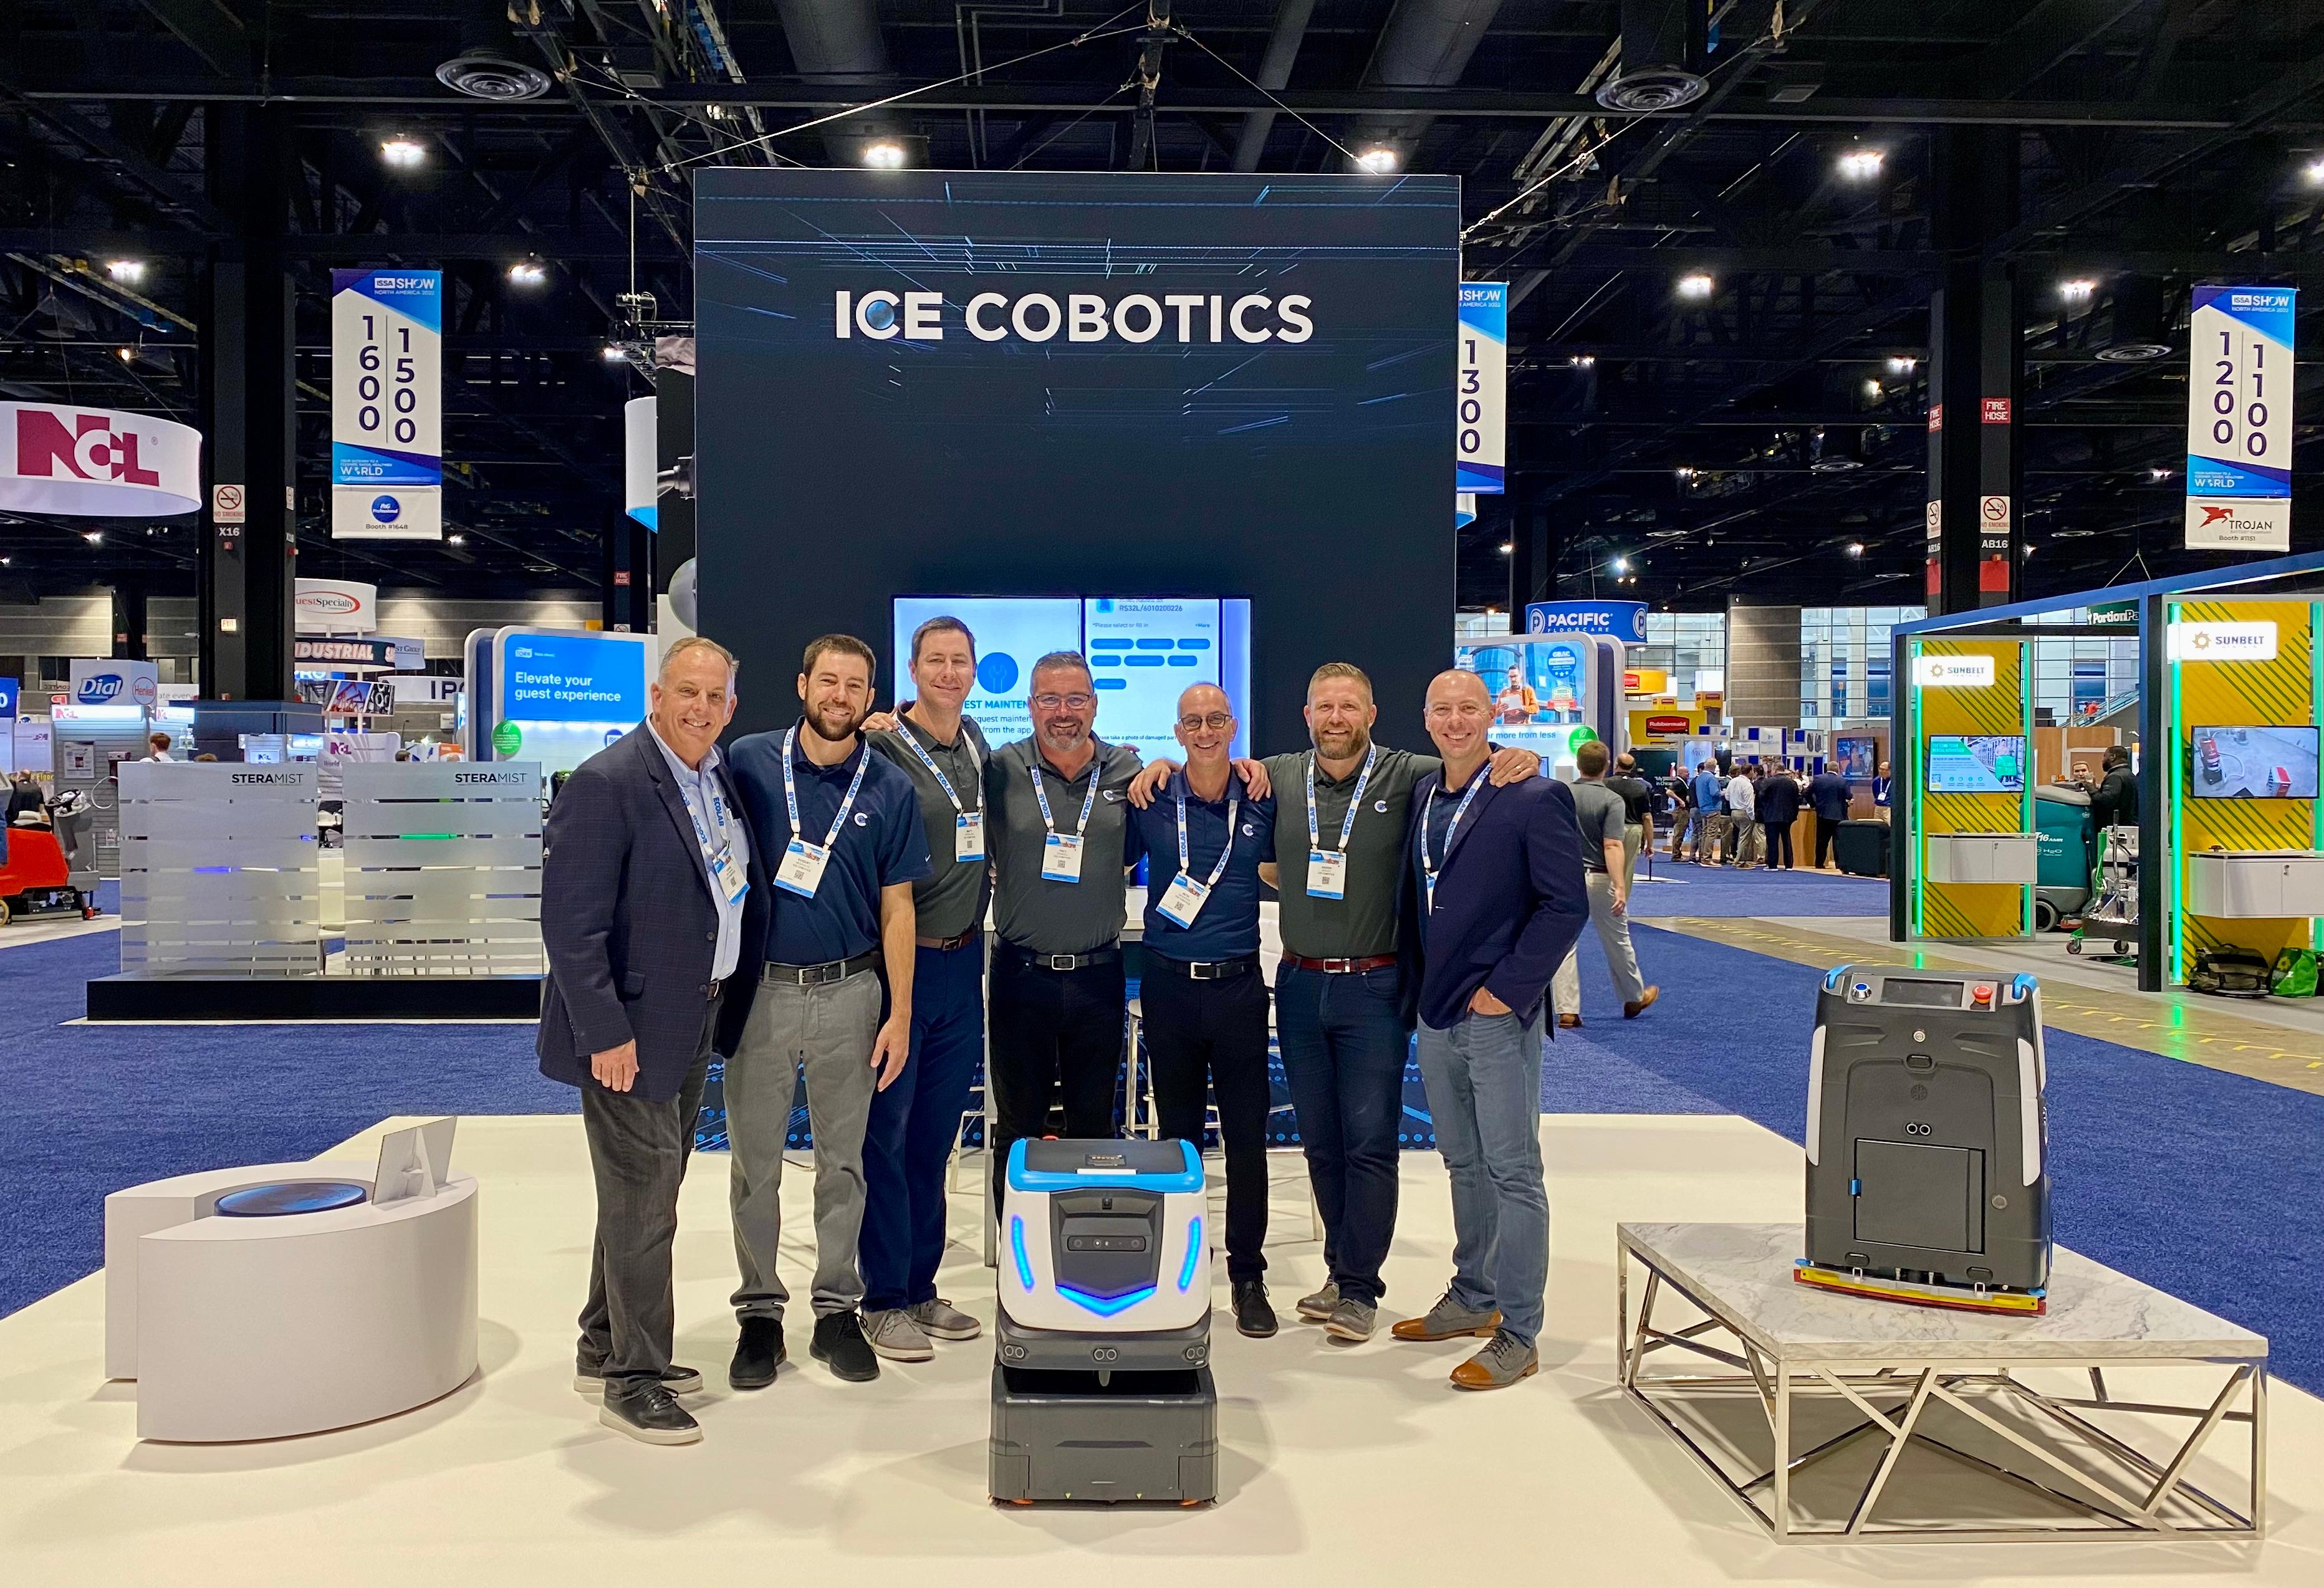 ICE Cobotics ISSA 2022 team memberst standing in trade show booth in front of large video wall and next to Cobi 18, robotic floor scrubber